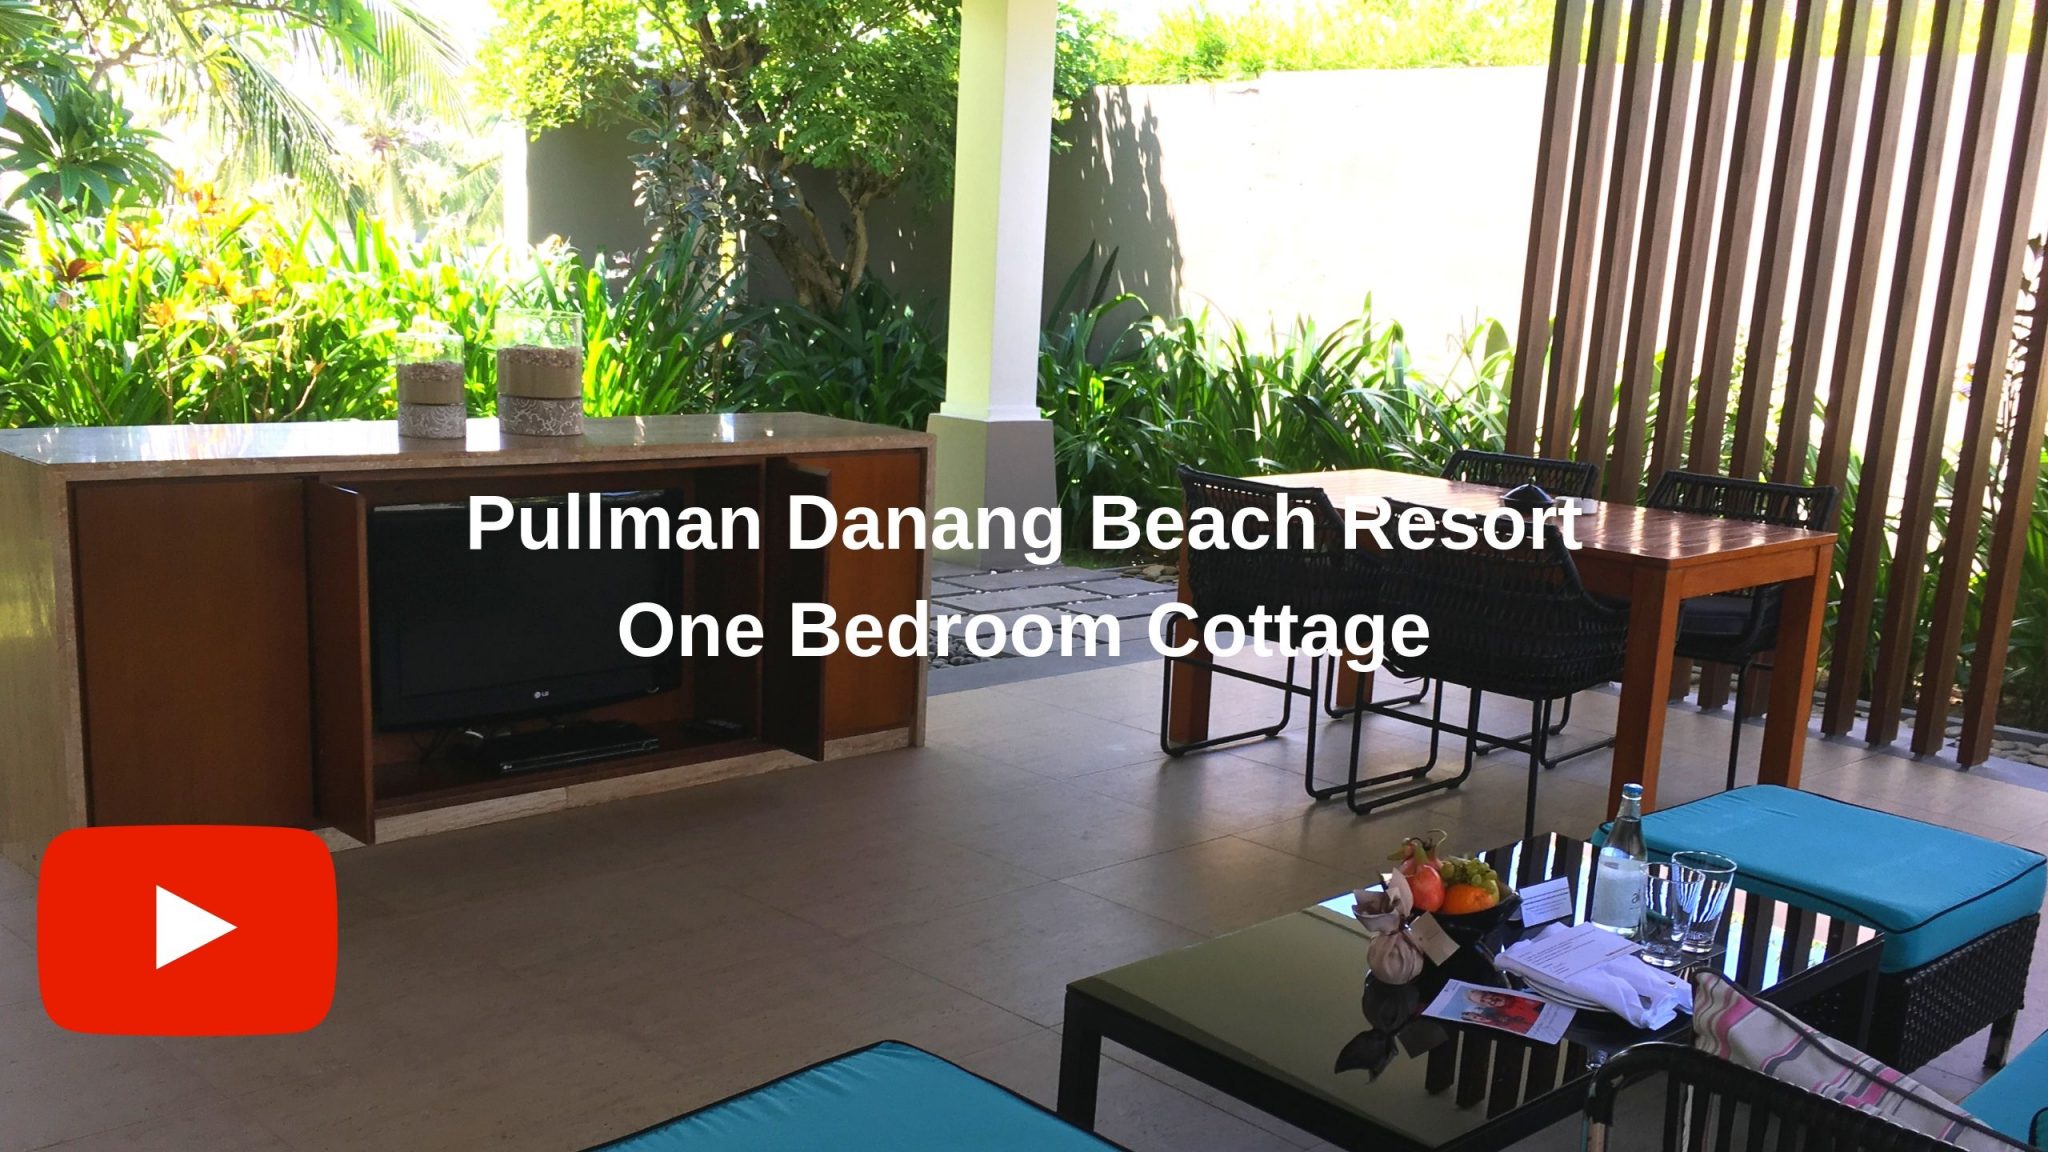 Youtube video on one bedroom cottage at Pullman Danang Beach Resort